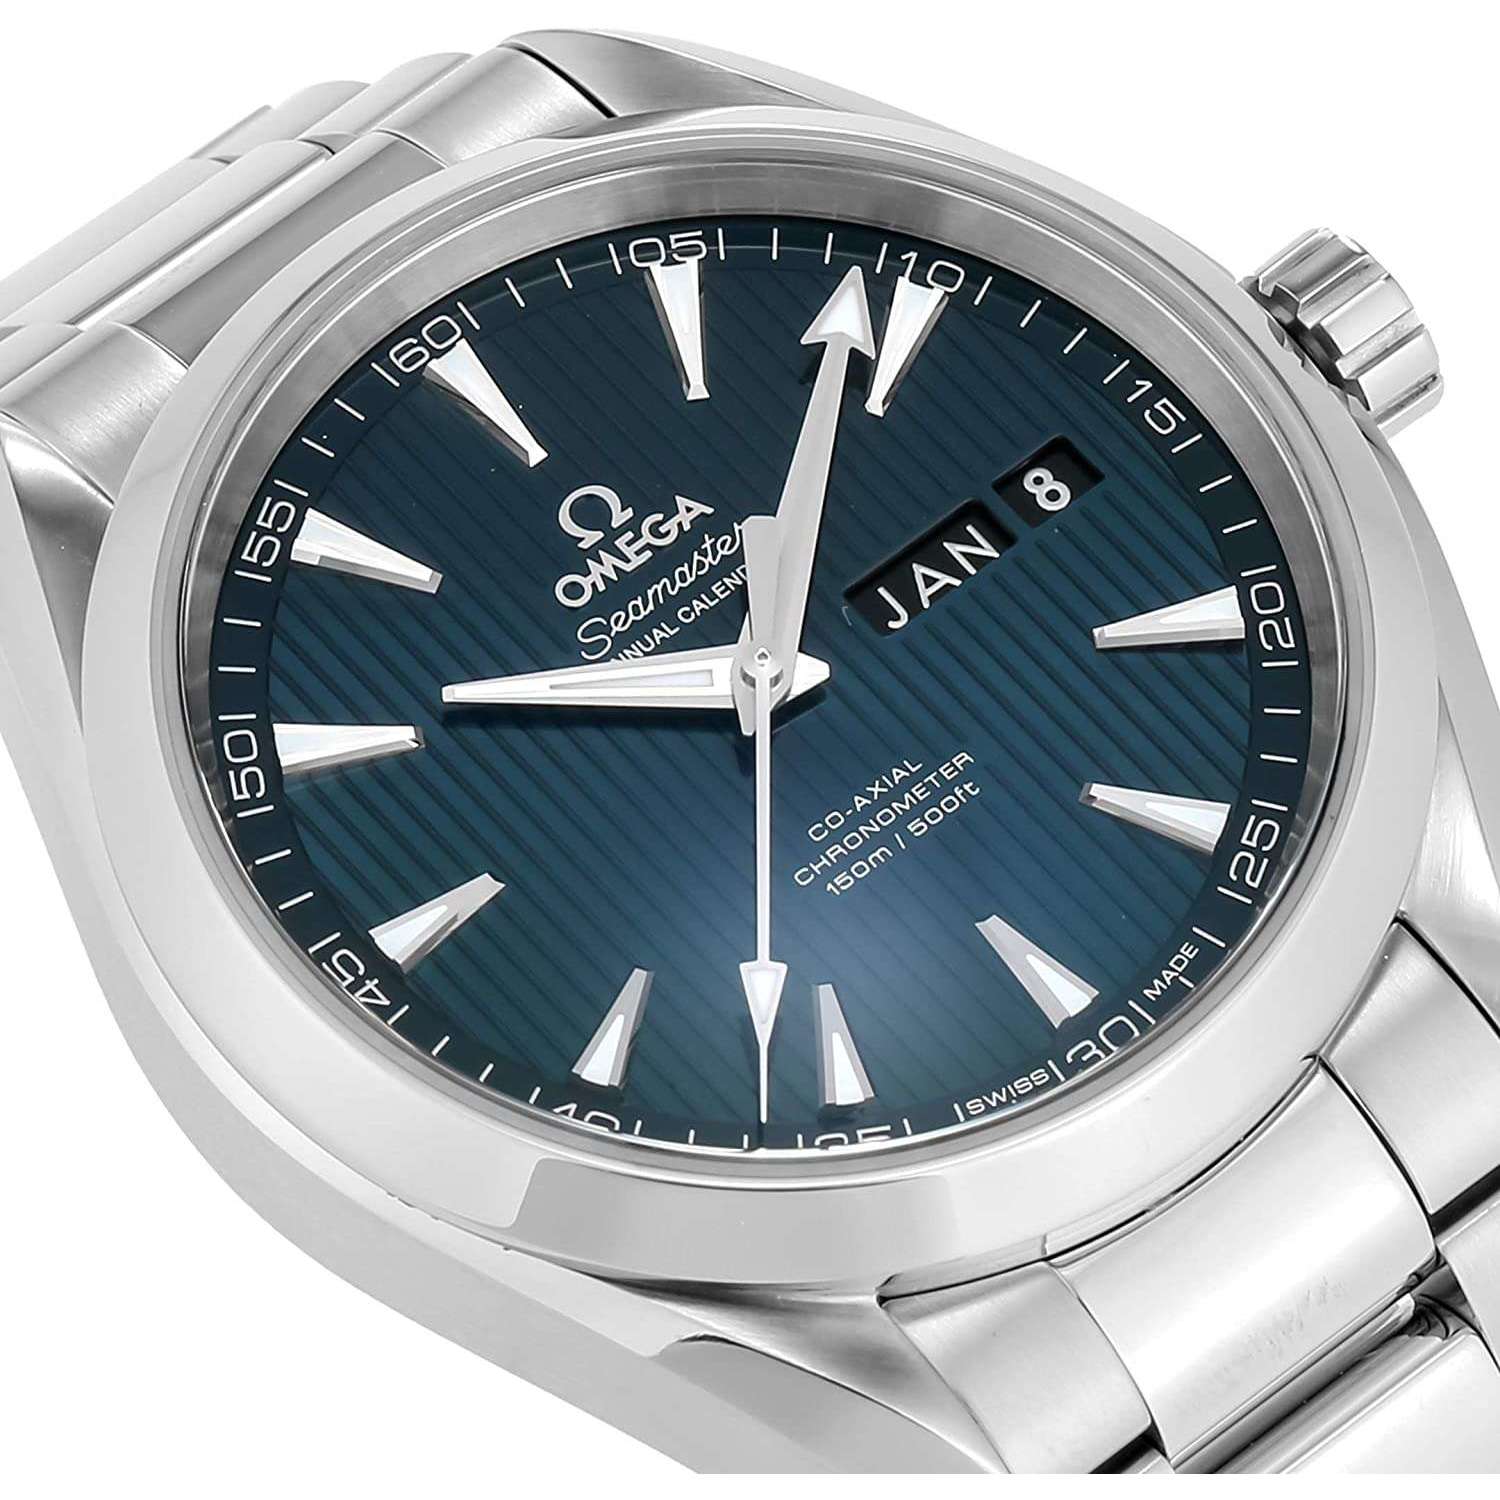 ROOK JAPAN:OMEGA SEAMASTER ANNUAL CALENDAR CO-AXIAL CHRONOMETER 41 MM MEN WATCH 231.10.43.22.03.002,Luxury Watch,Omega